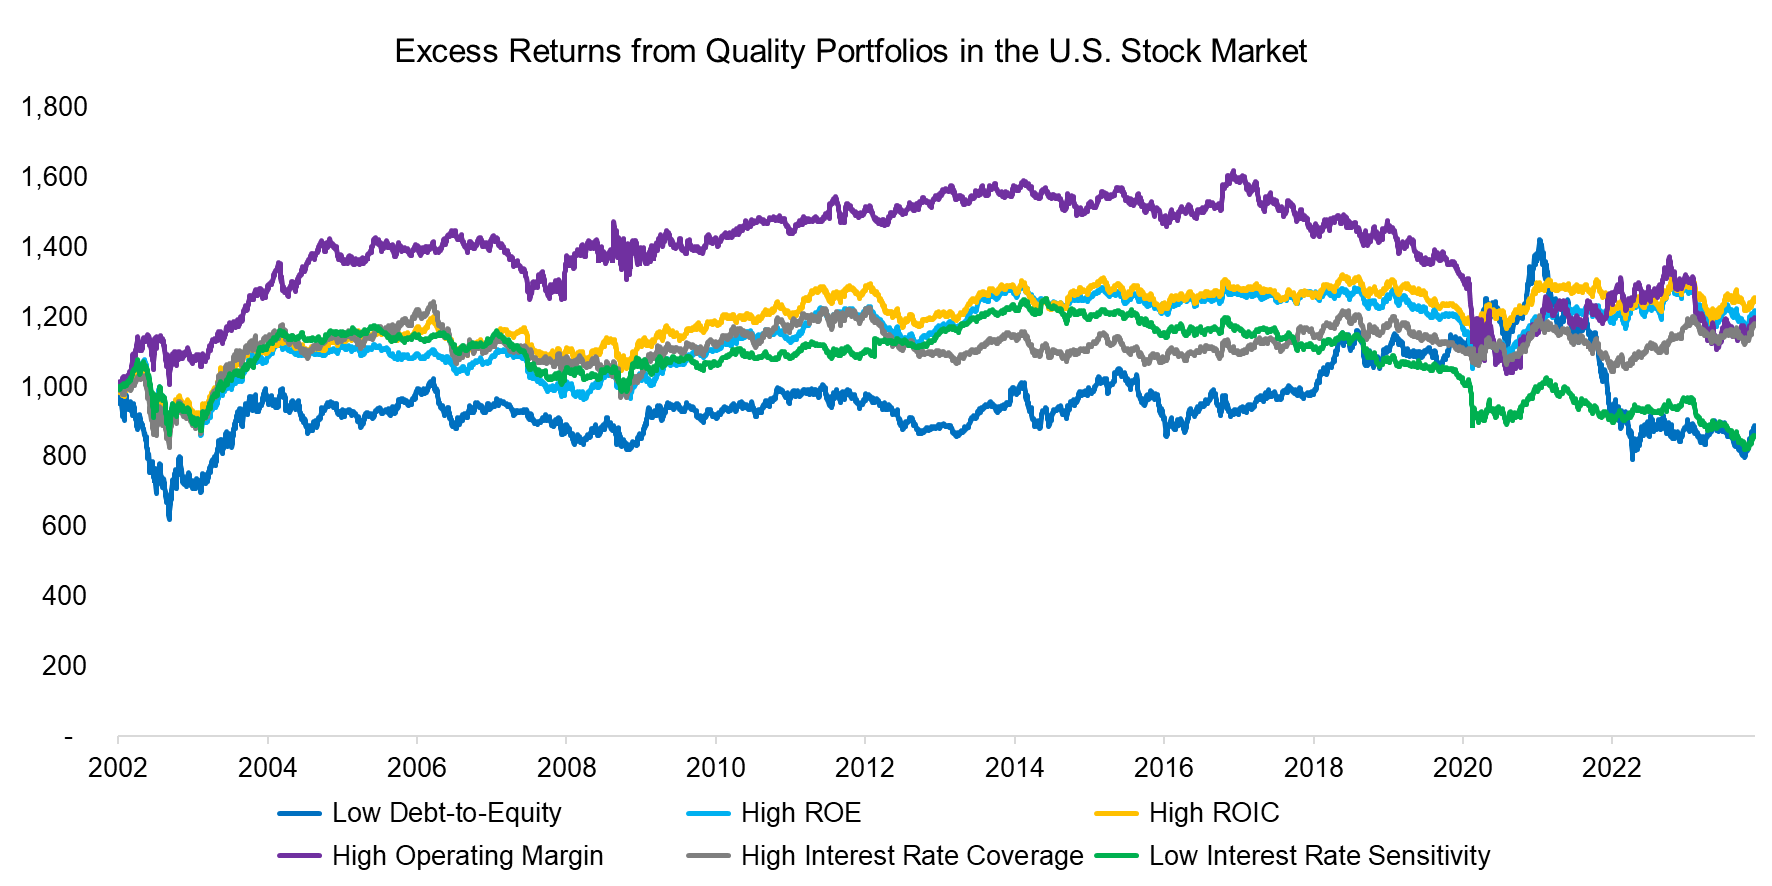 Excess Returns from Quality Portfolios in the U.S. Stock Market